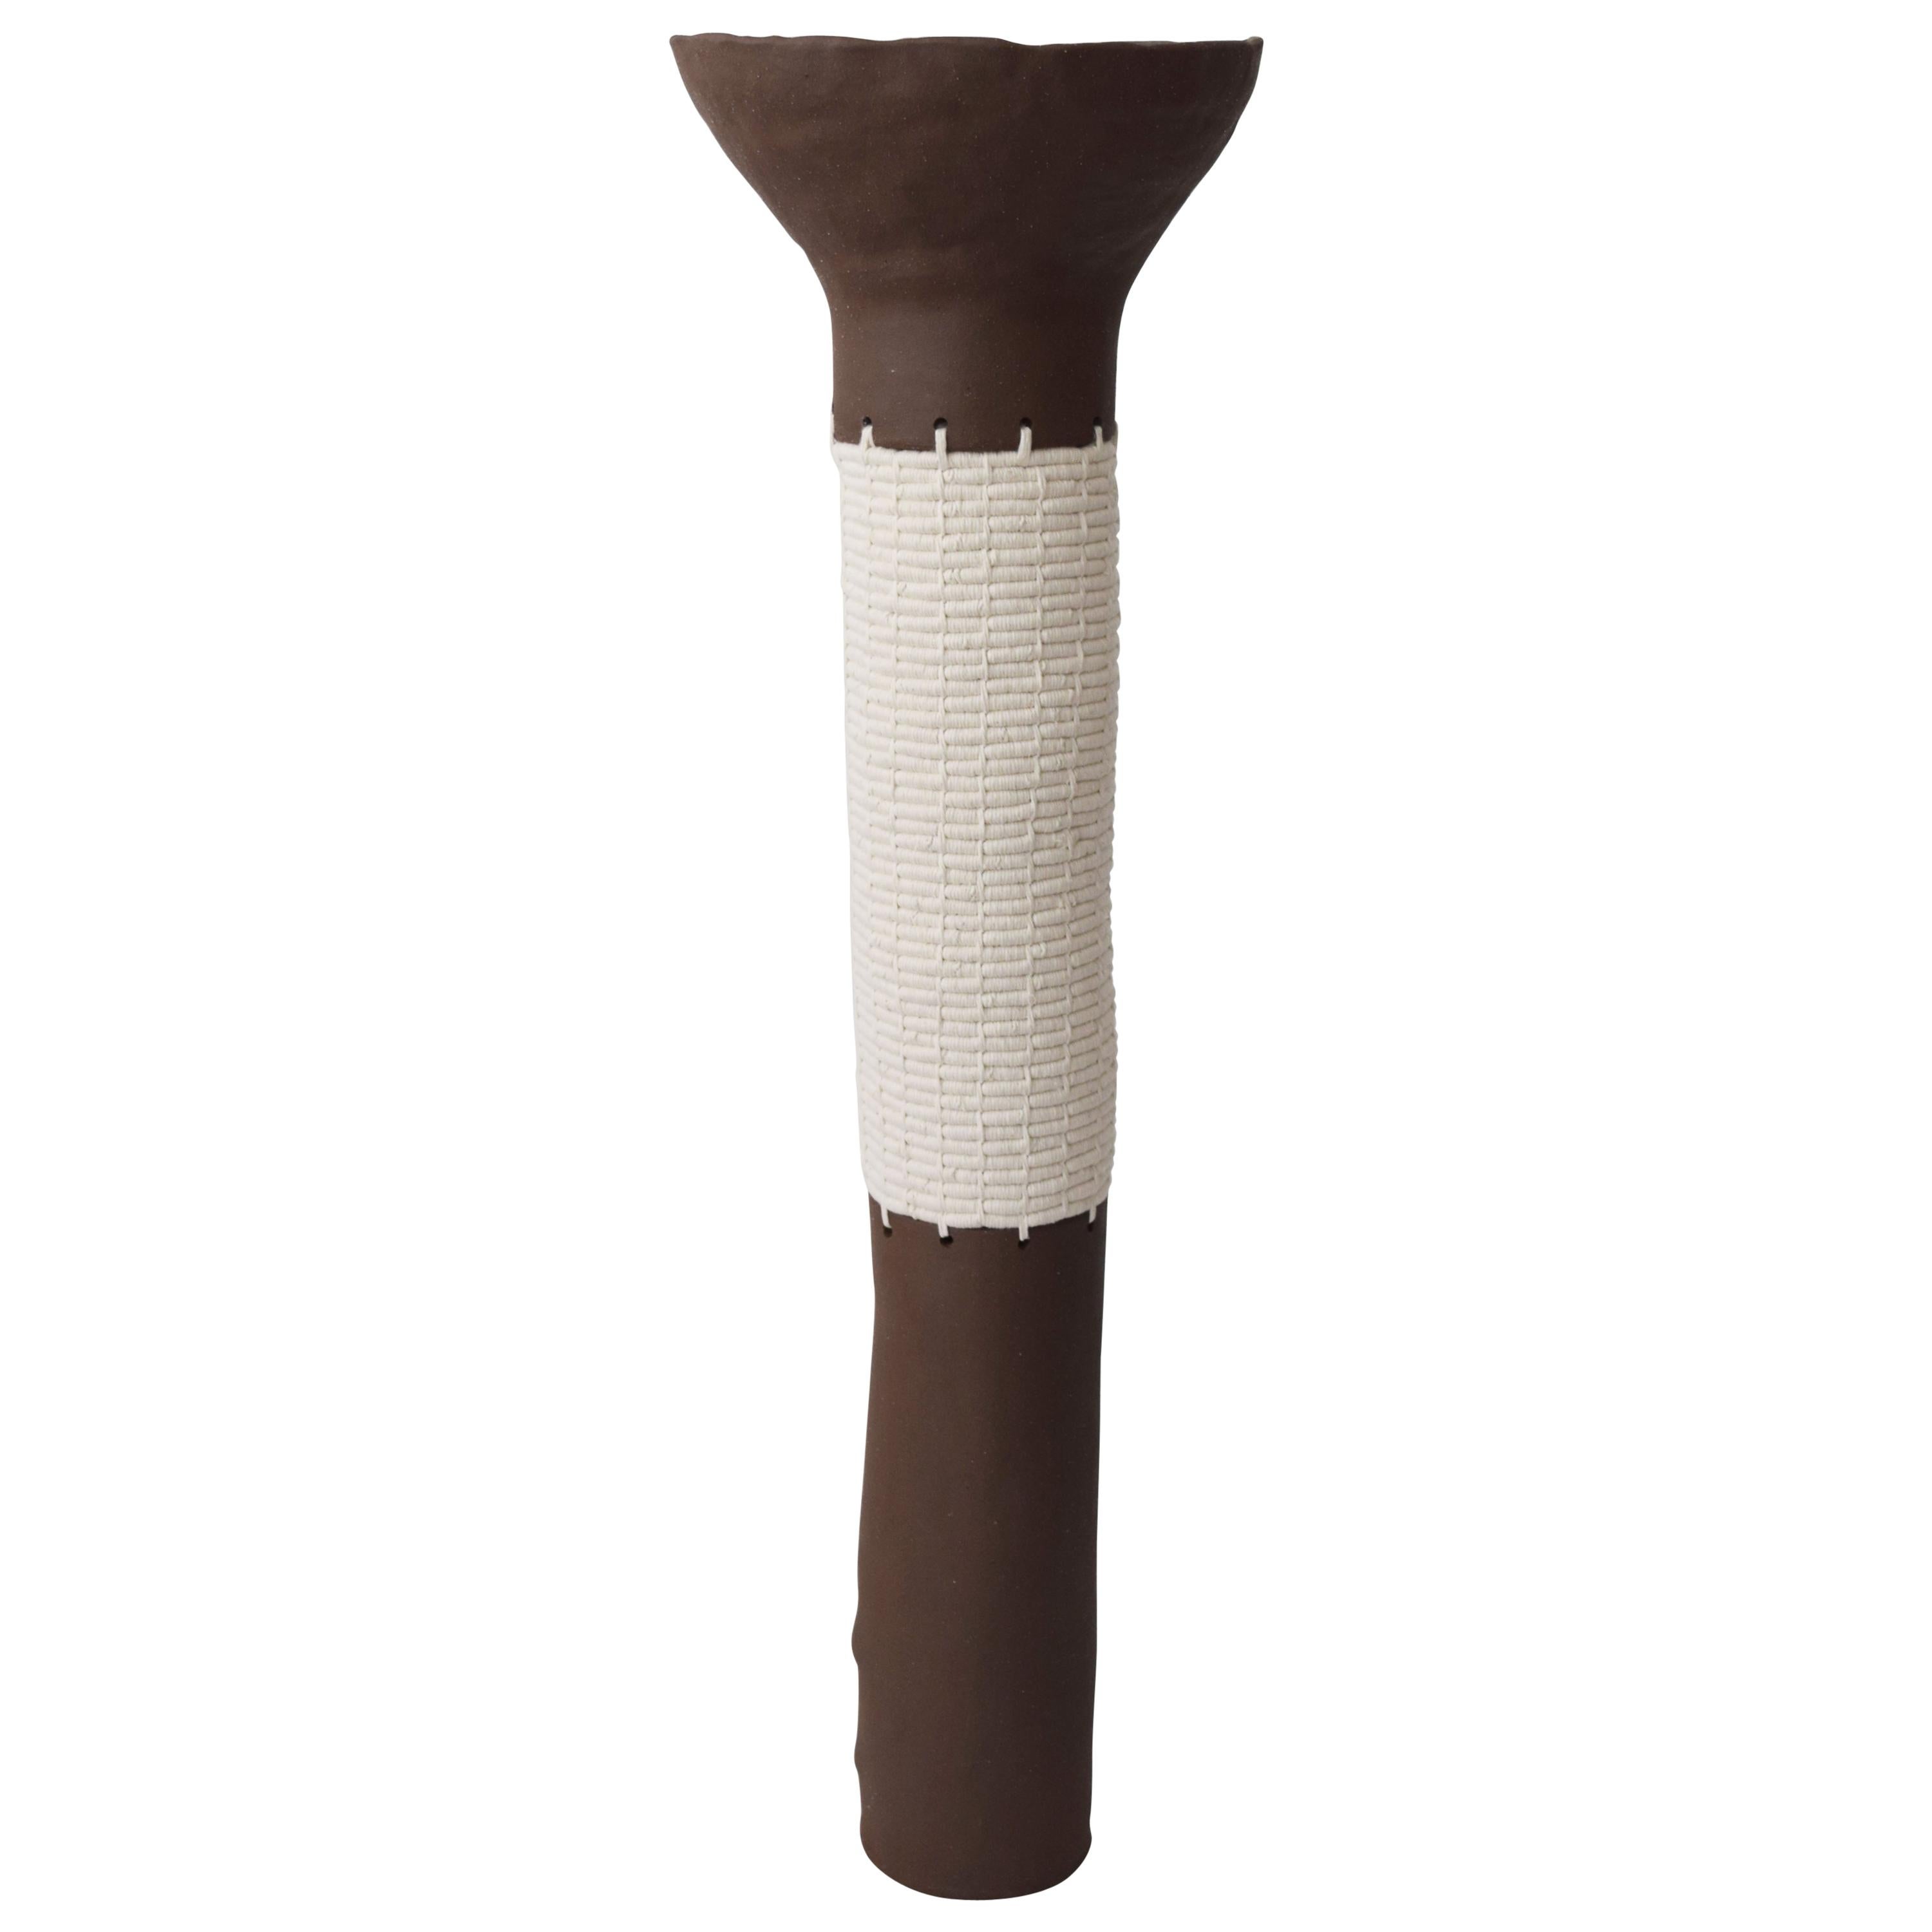 Tall Ceramic and Woven Cotton Floor Vessel in White/Brown